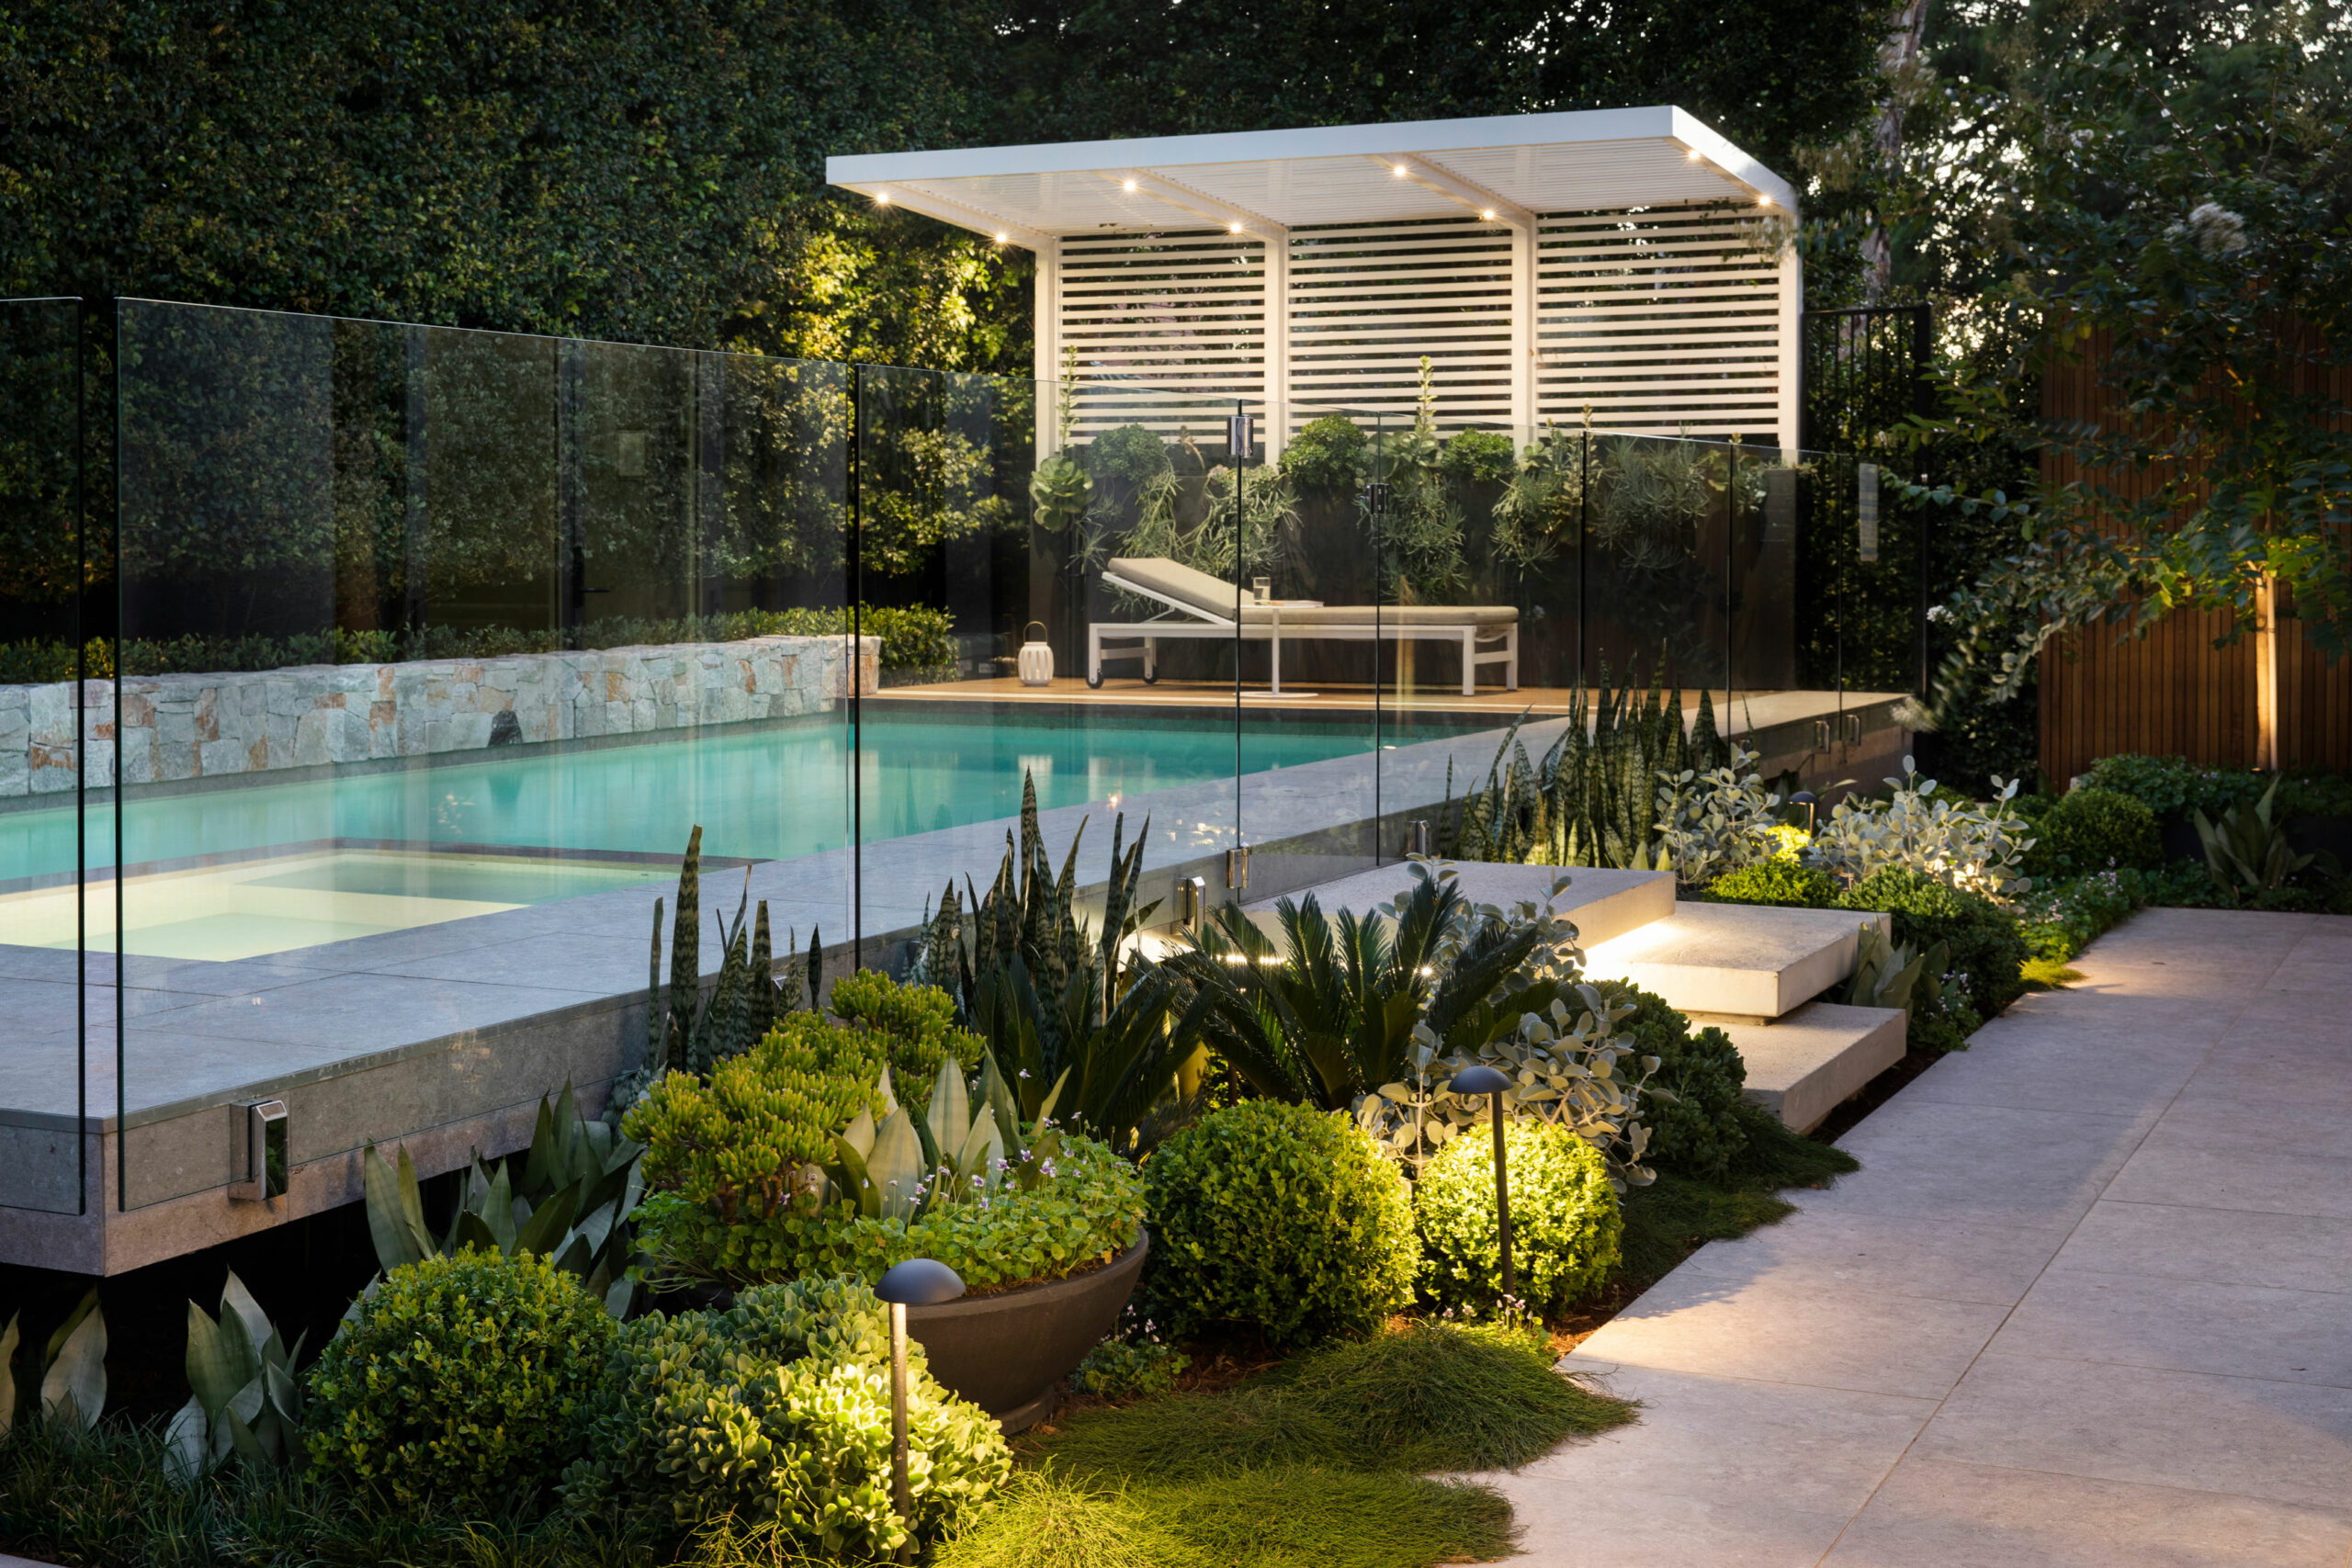 Maroubra Secluded Gem - floating pool by night - garden lighting - pool lighting - white pergola - glass pool fence - stone wall cladding - native planting palette